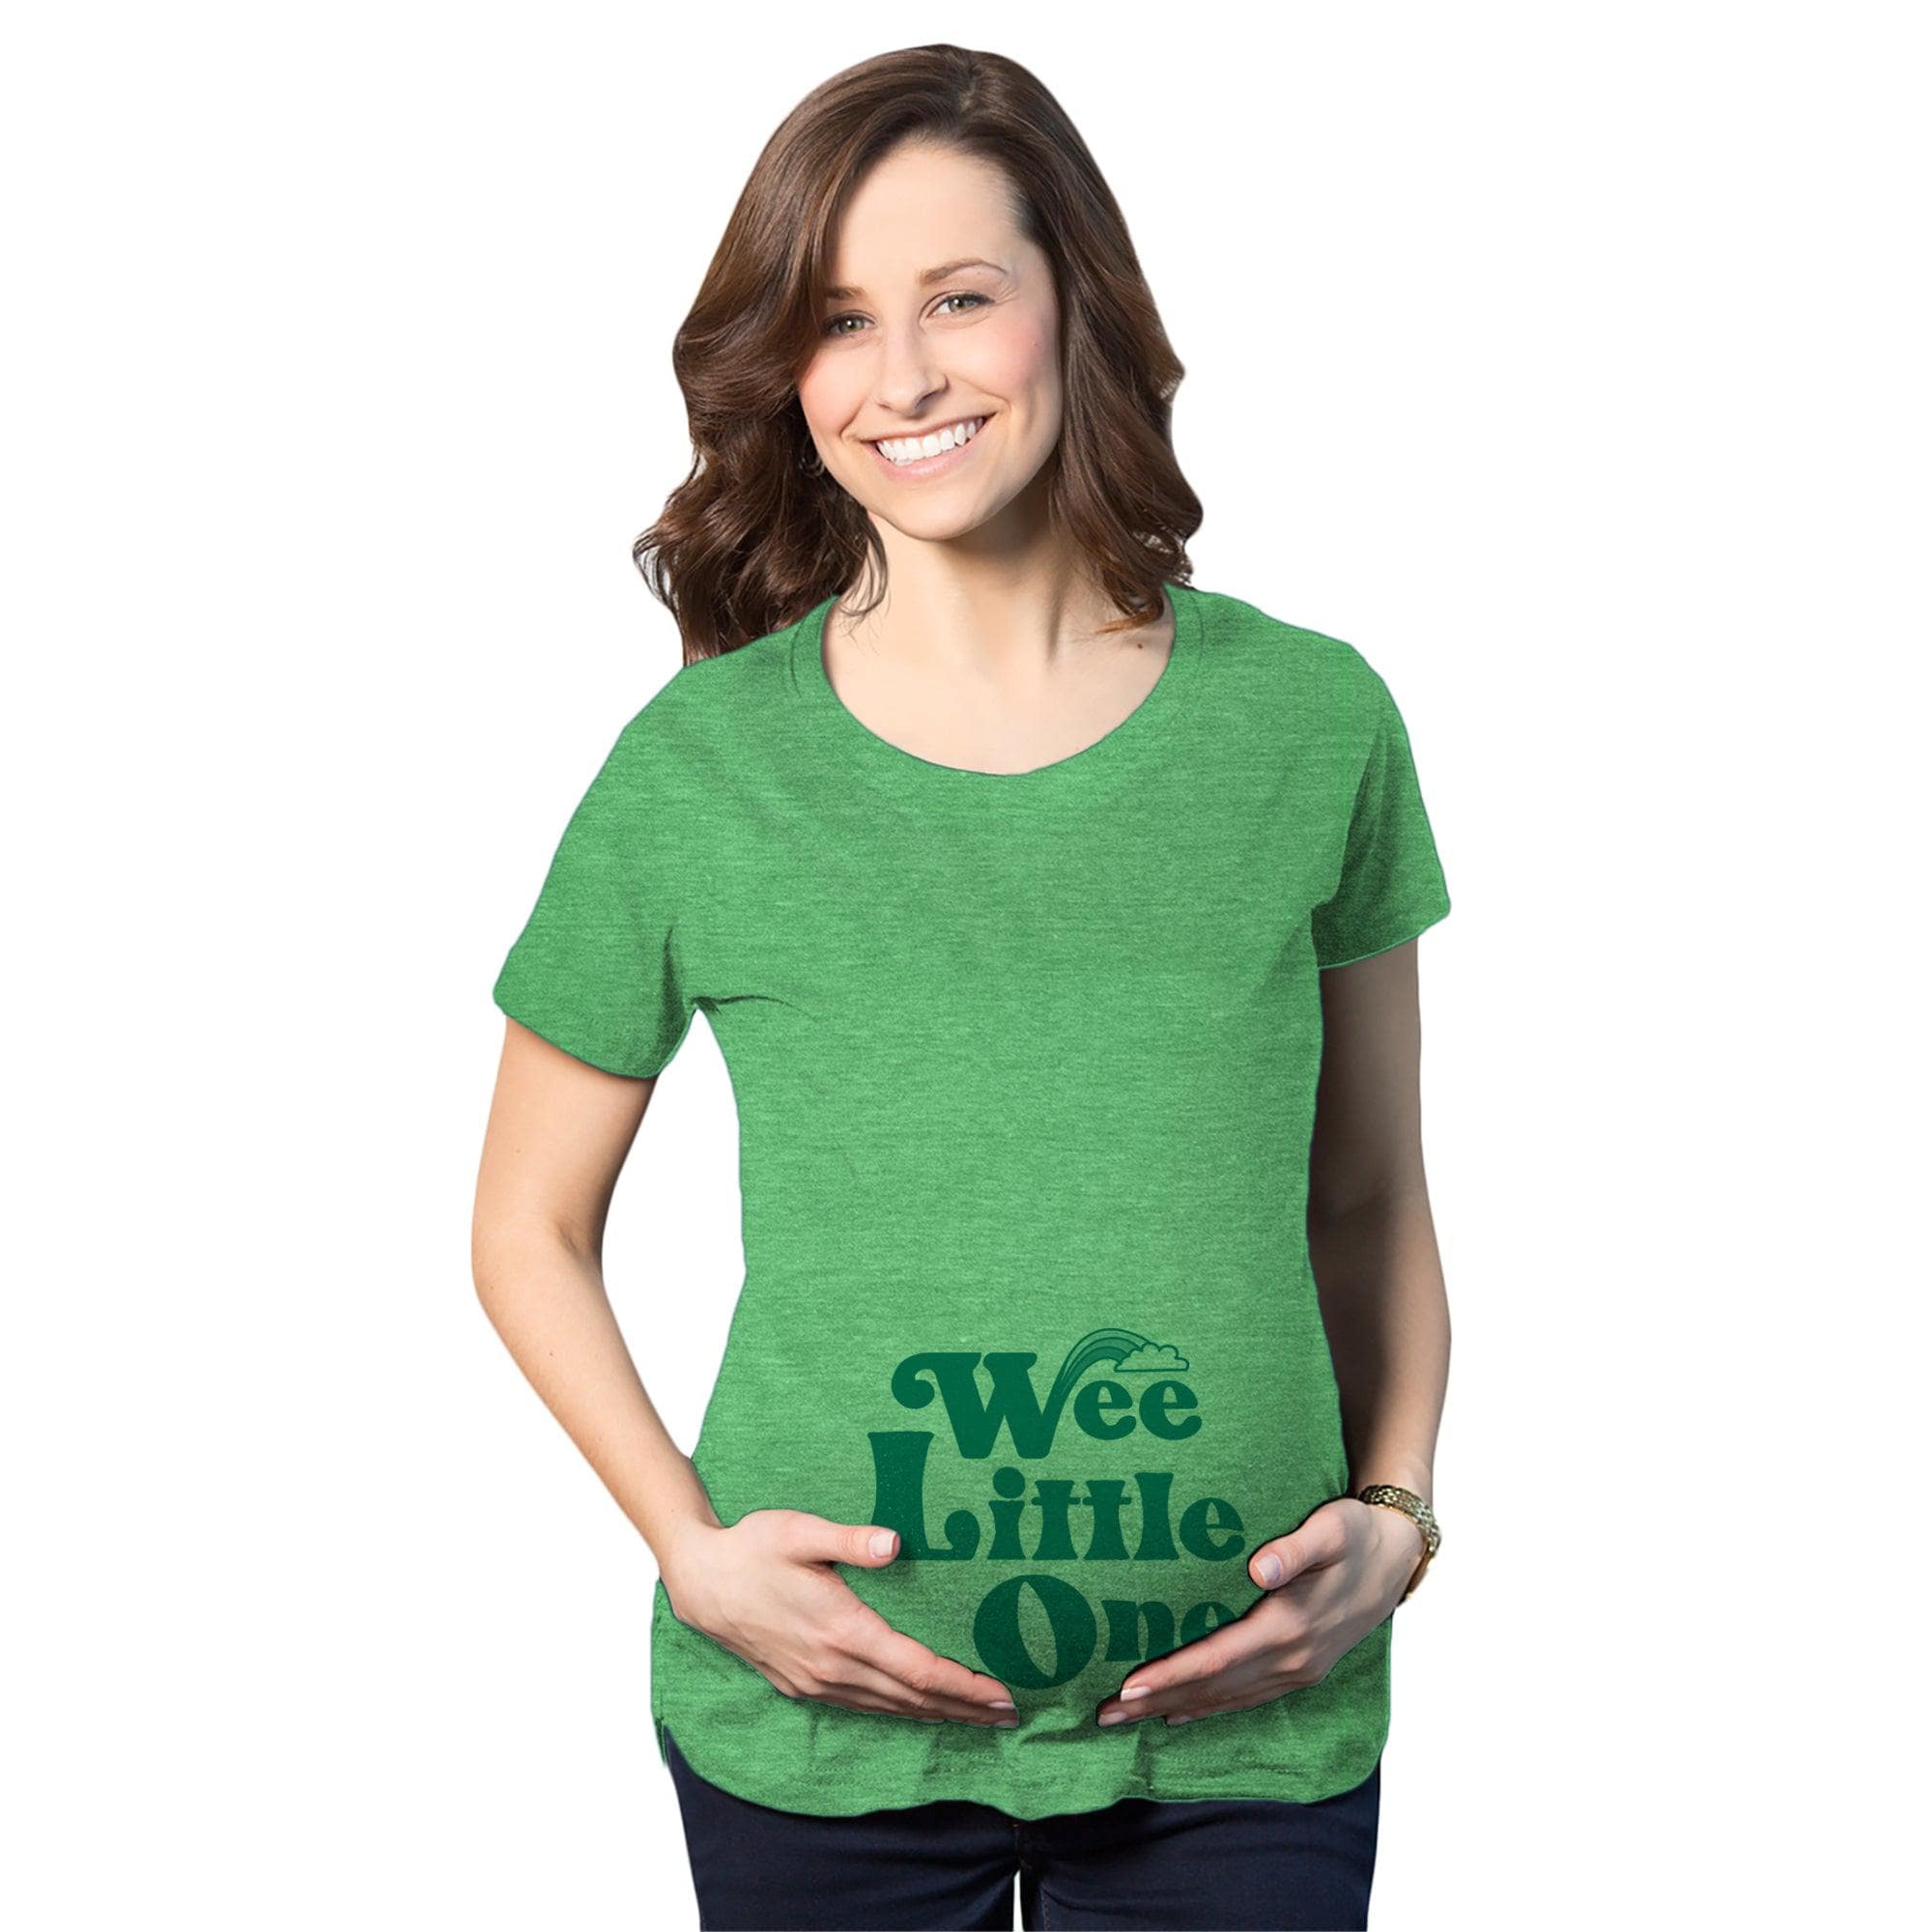 Wee Little One Maternity Tshirt  -  Crazy Dog T-Shirts